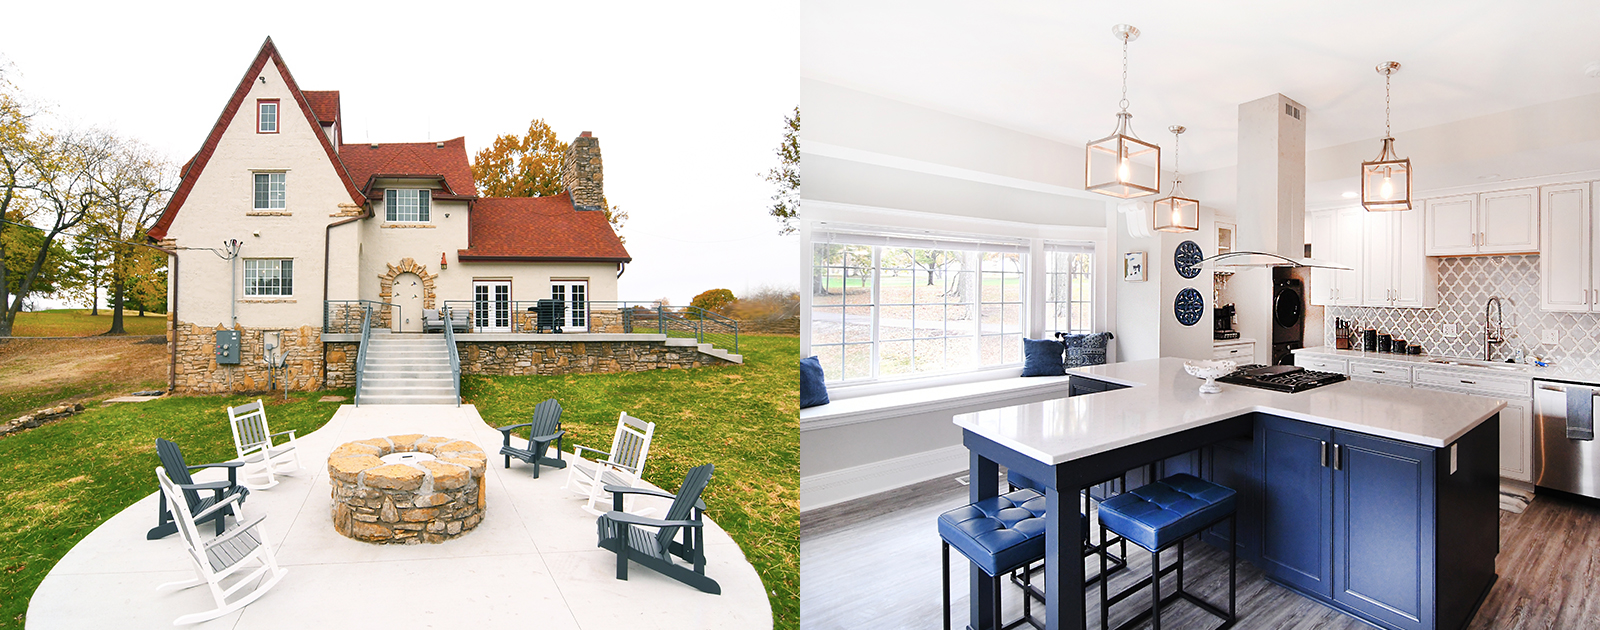 The Hummingbird Chateau at Unity Village—a charming white house with a red roof and chairs in the front sitting around a fire pit and a view of the modern white and dark blue kitchen